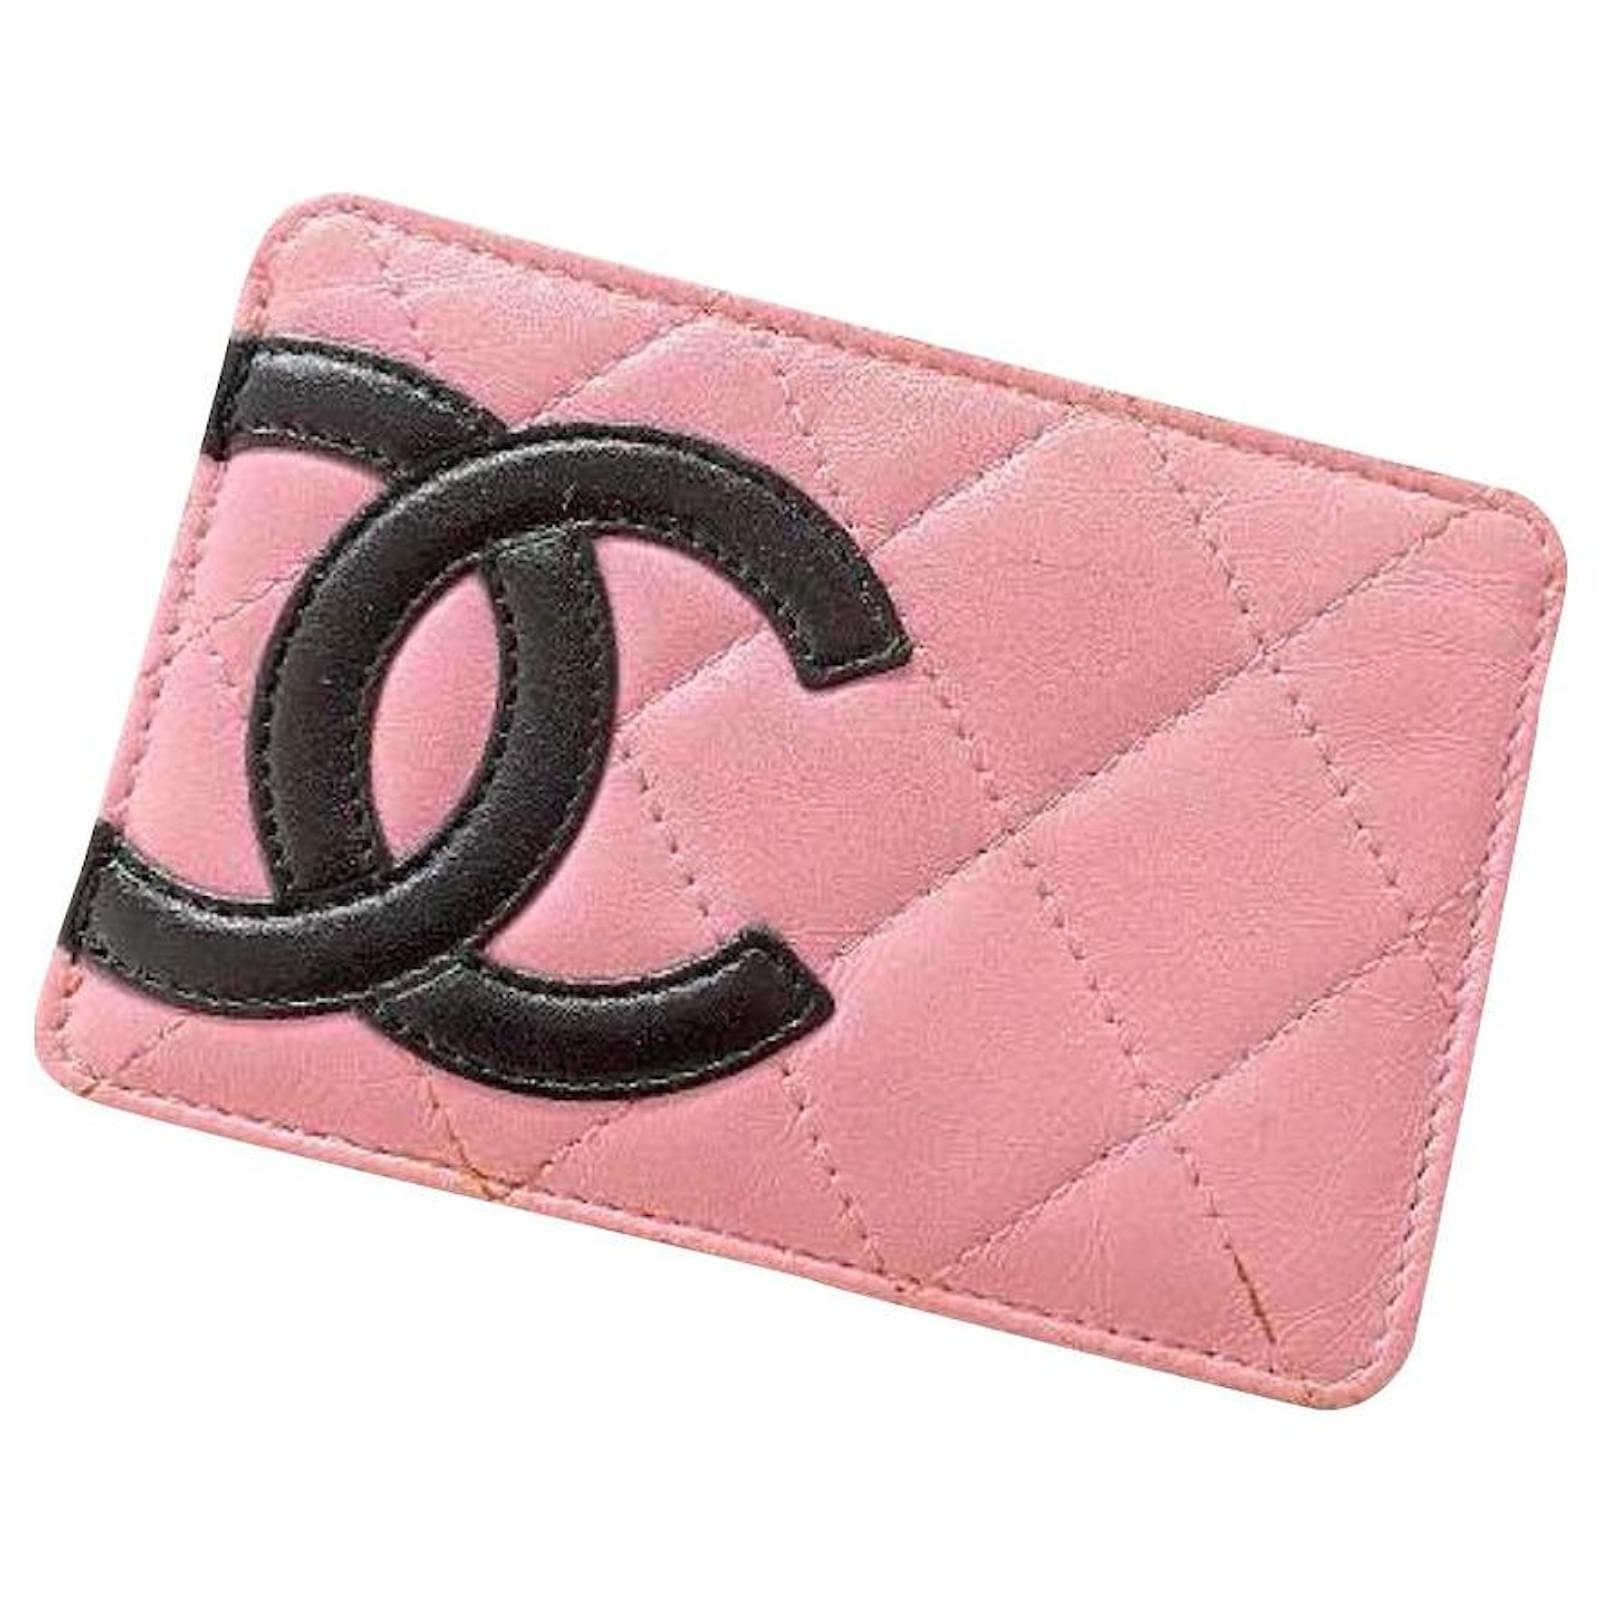 pink and black chanel wallet